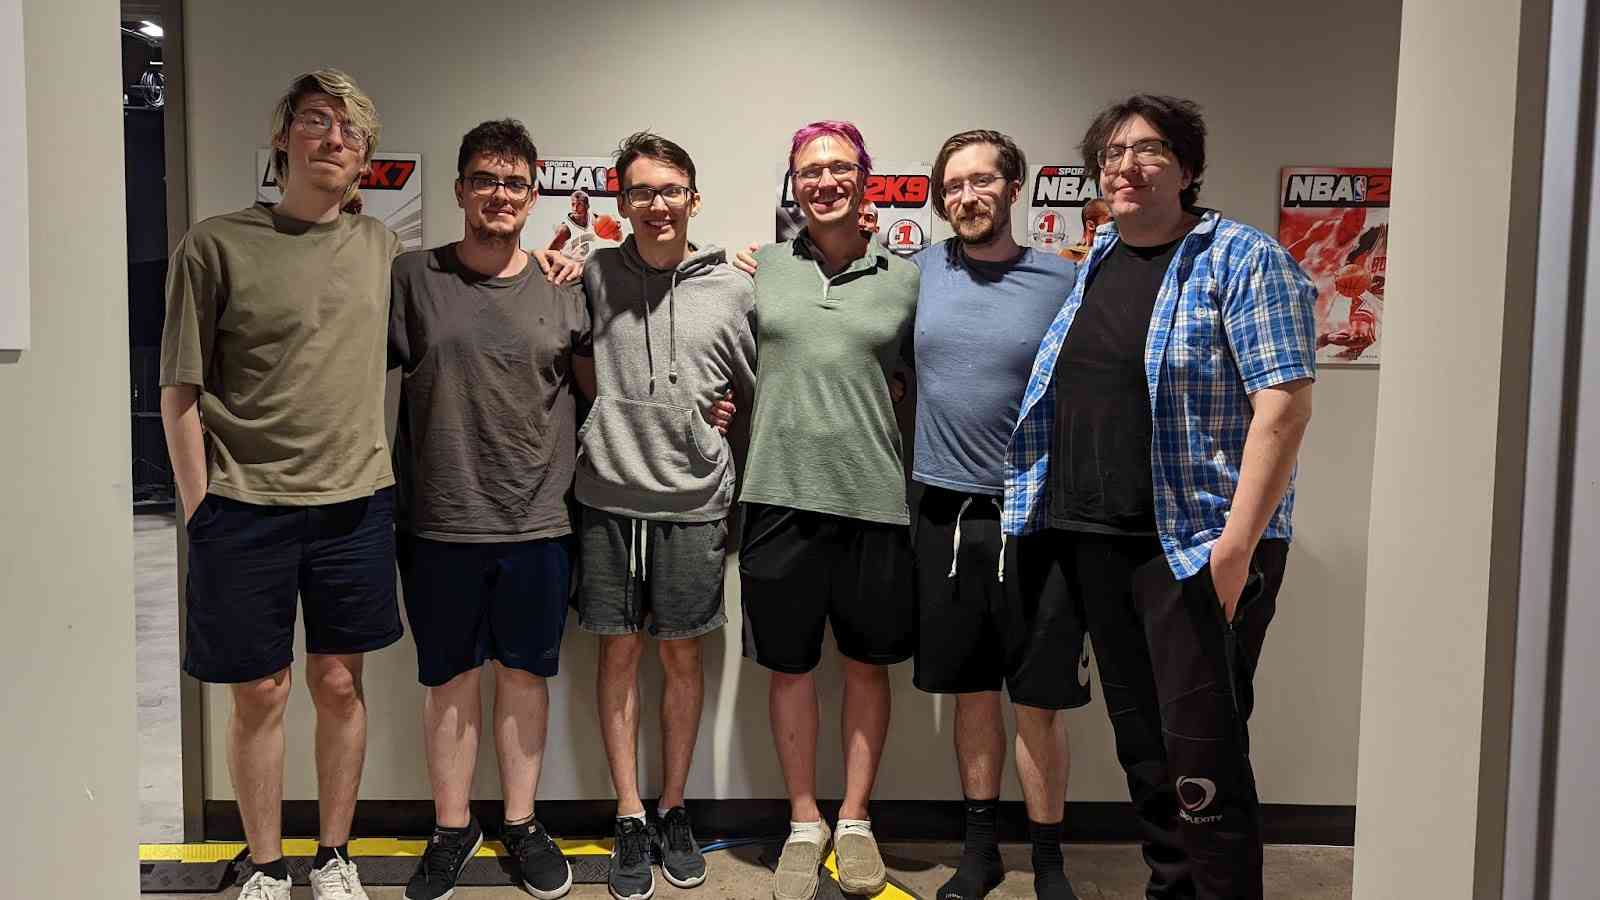 The roster for 4 Zoomers stand together back stage at an event